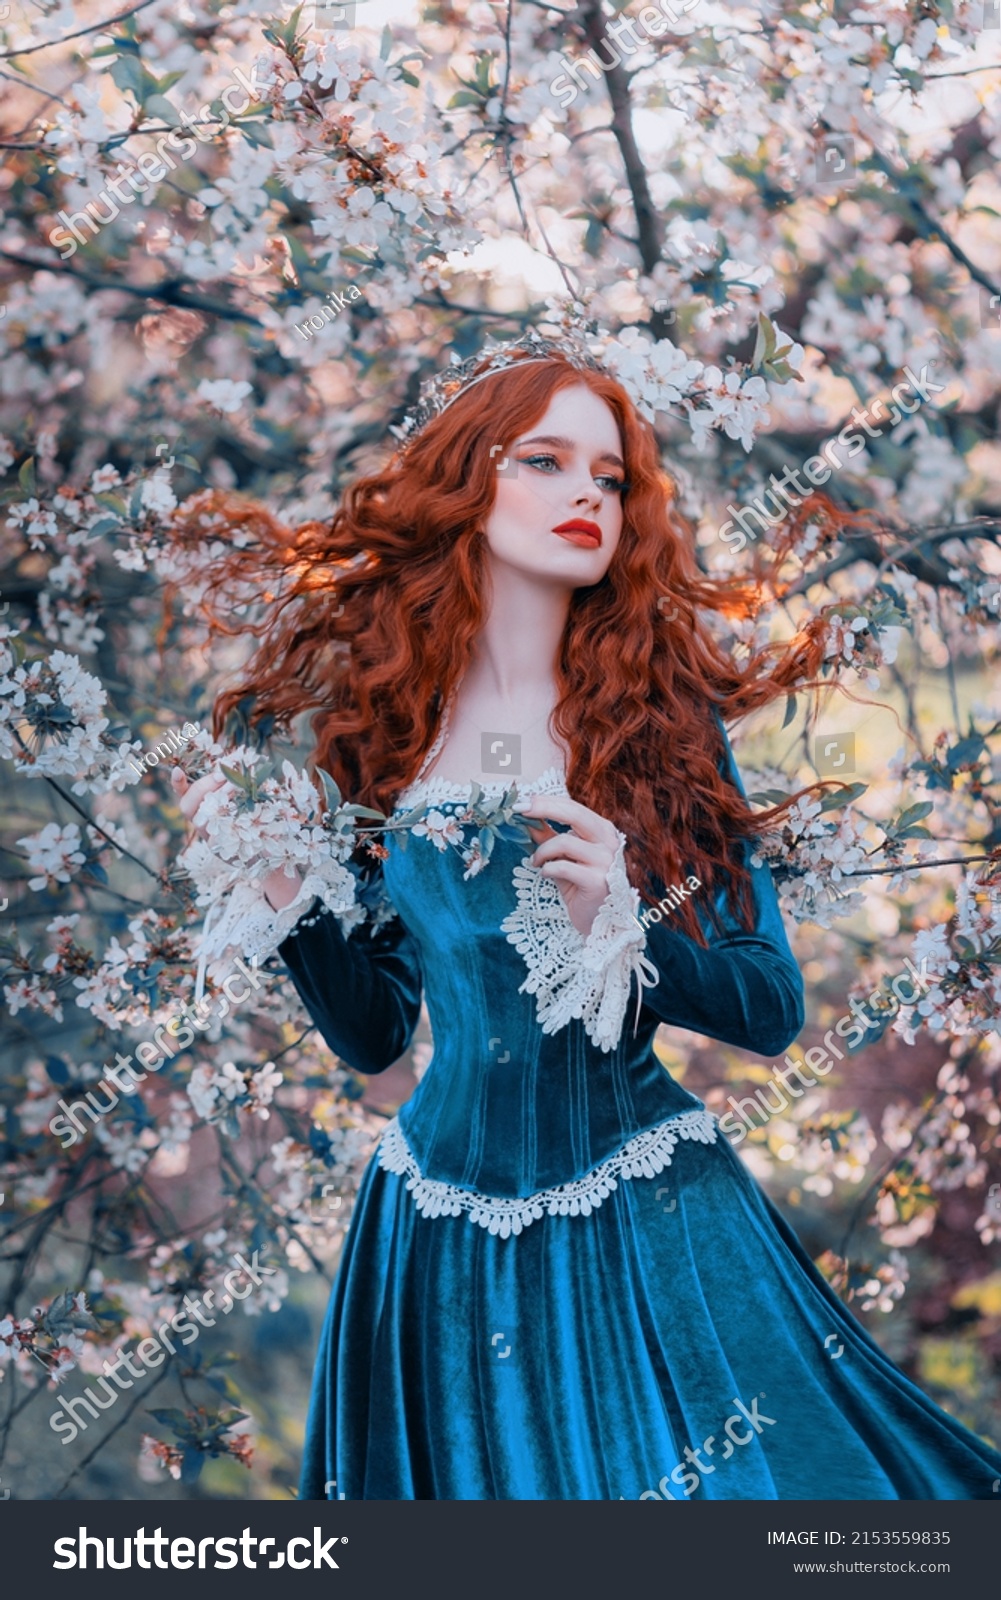 Fantasy portrait red-haired girl romantic princess stands in spring flowering garden. Blooming green tree flowers. Long hair red lips pale skin face woman queen medieval vintage creative design dress #2153559835